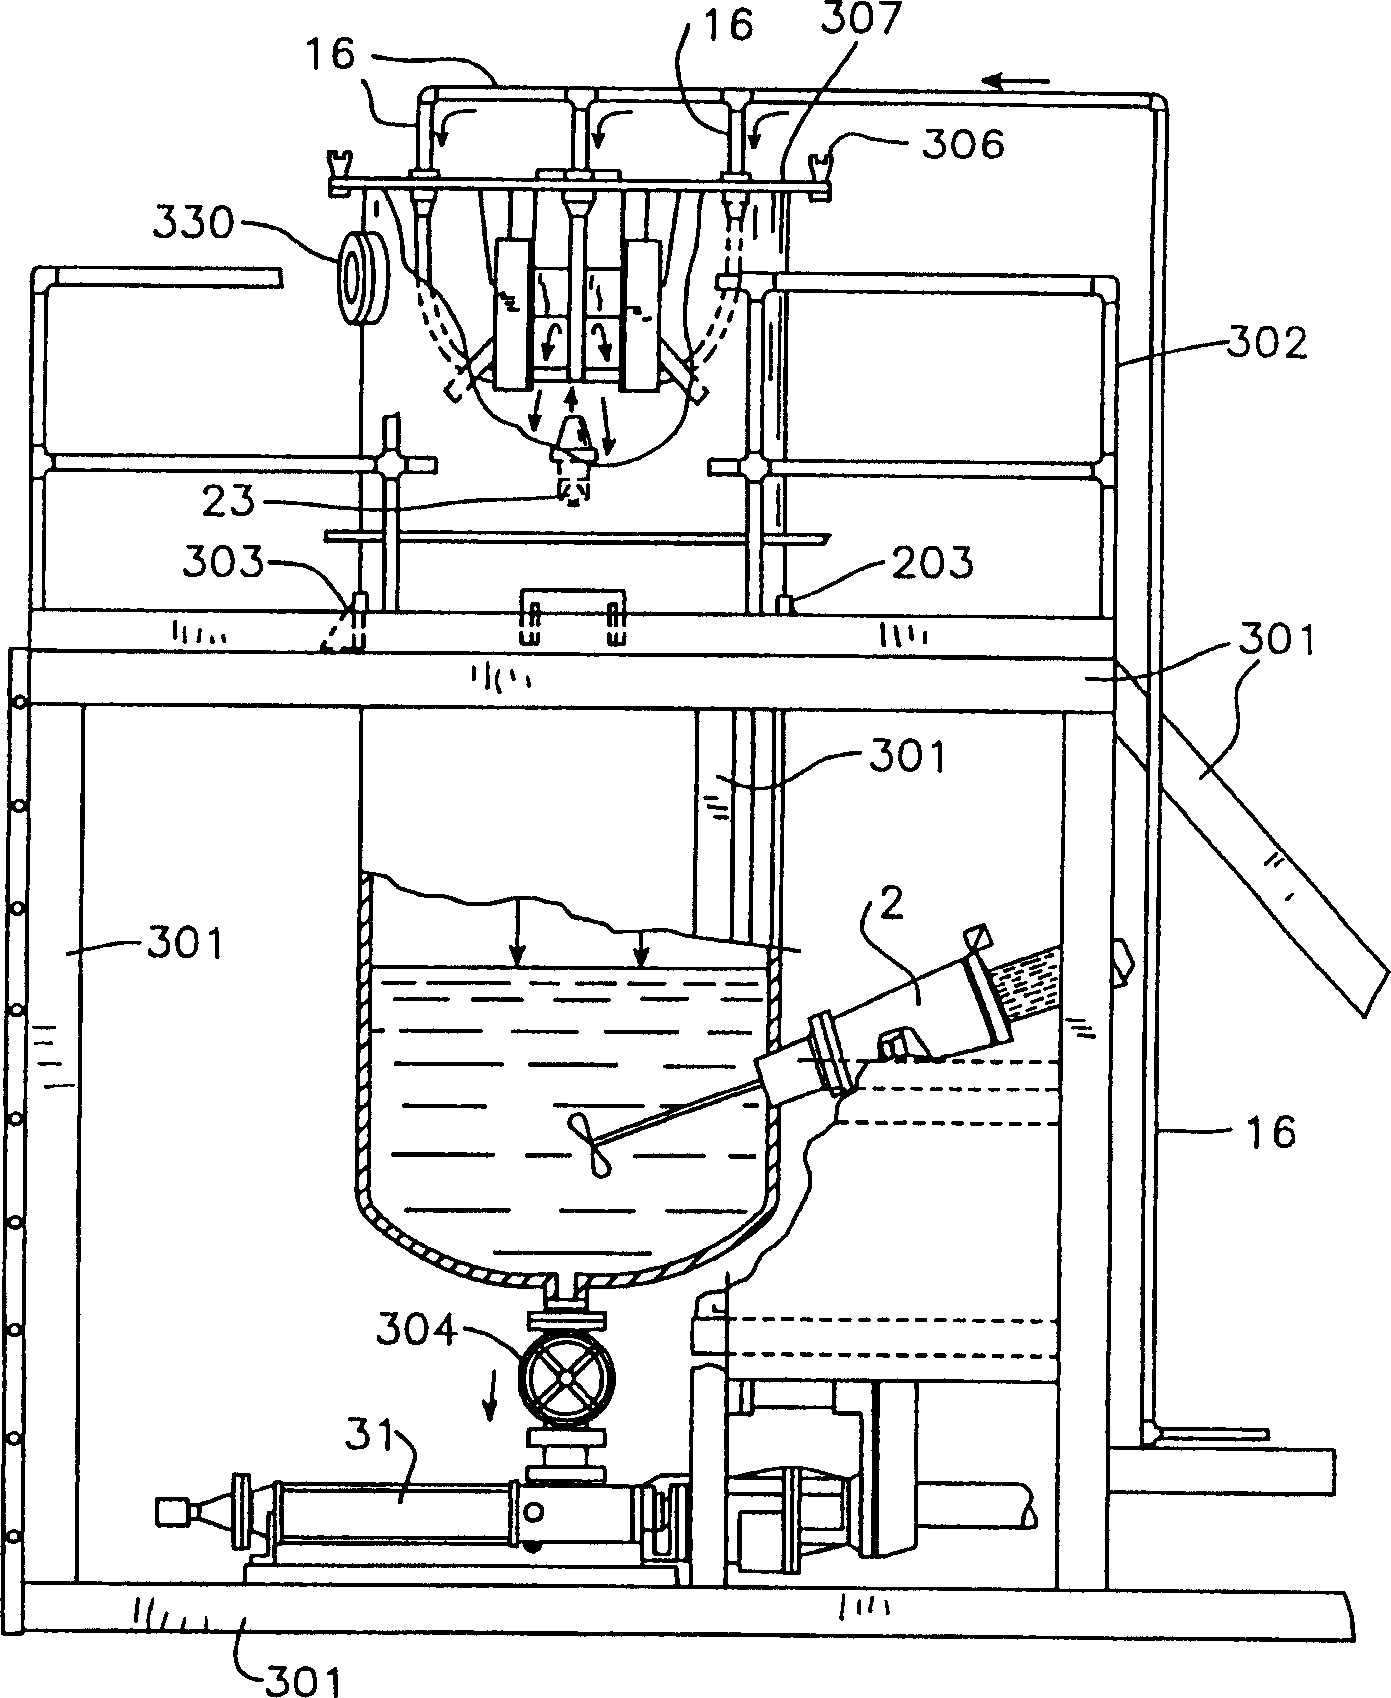 Apparatus and method for removing contaminants from fine grained soil, clay and silt